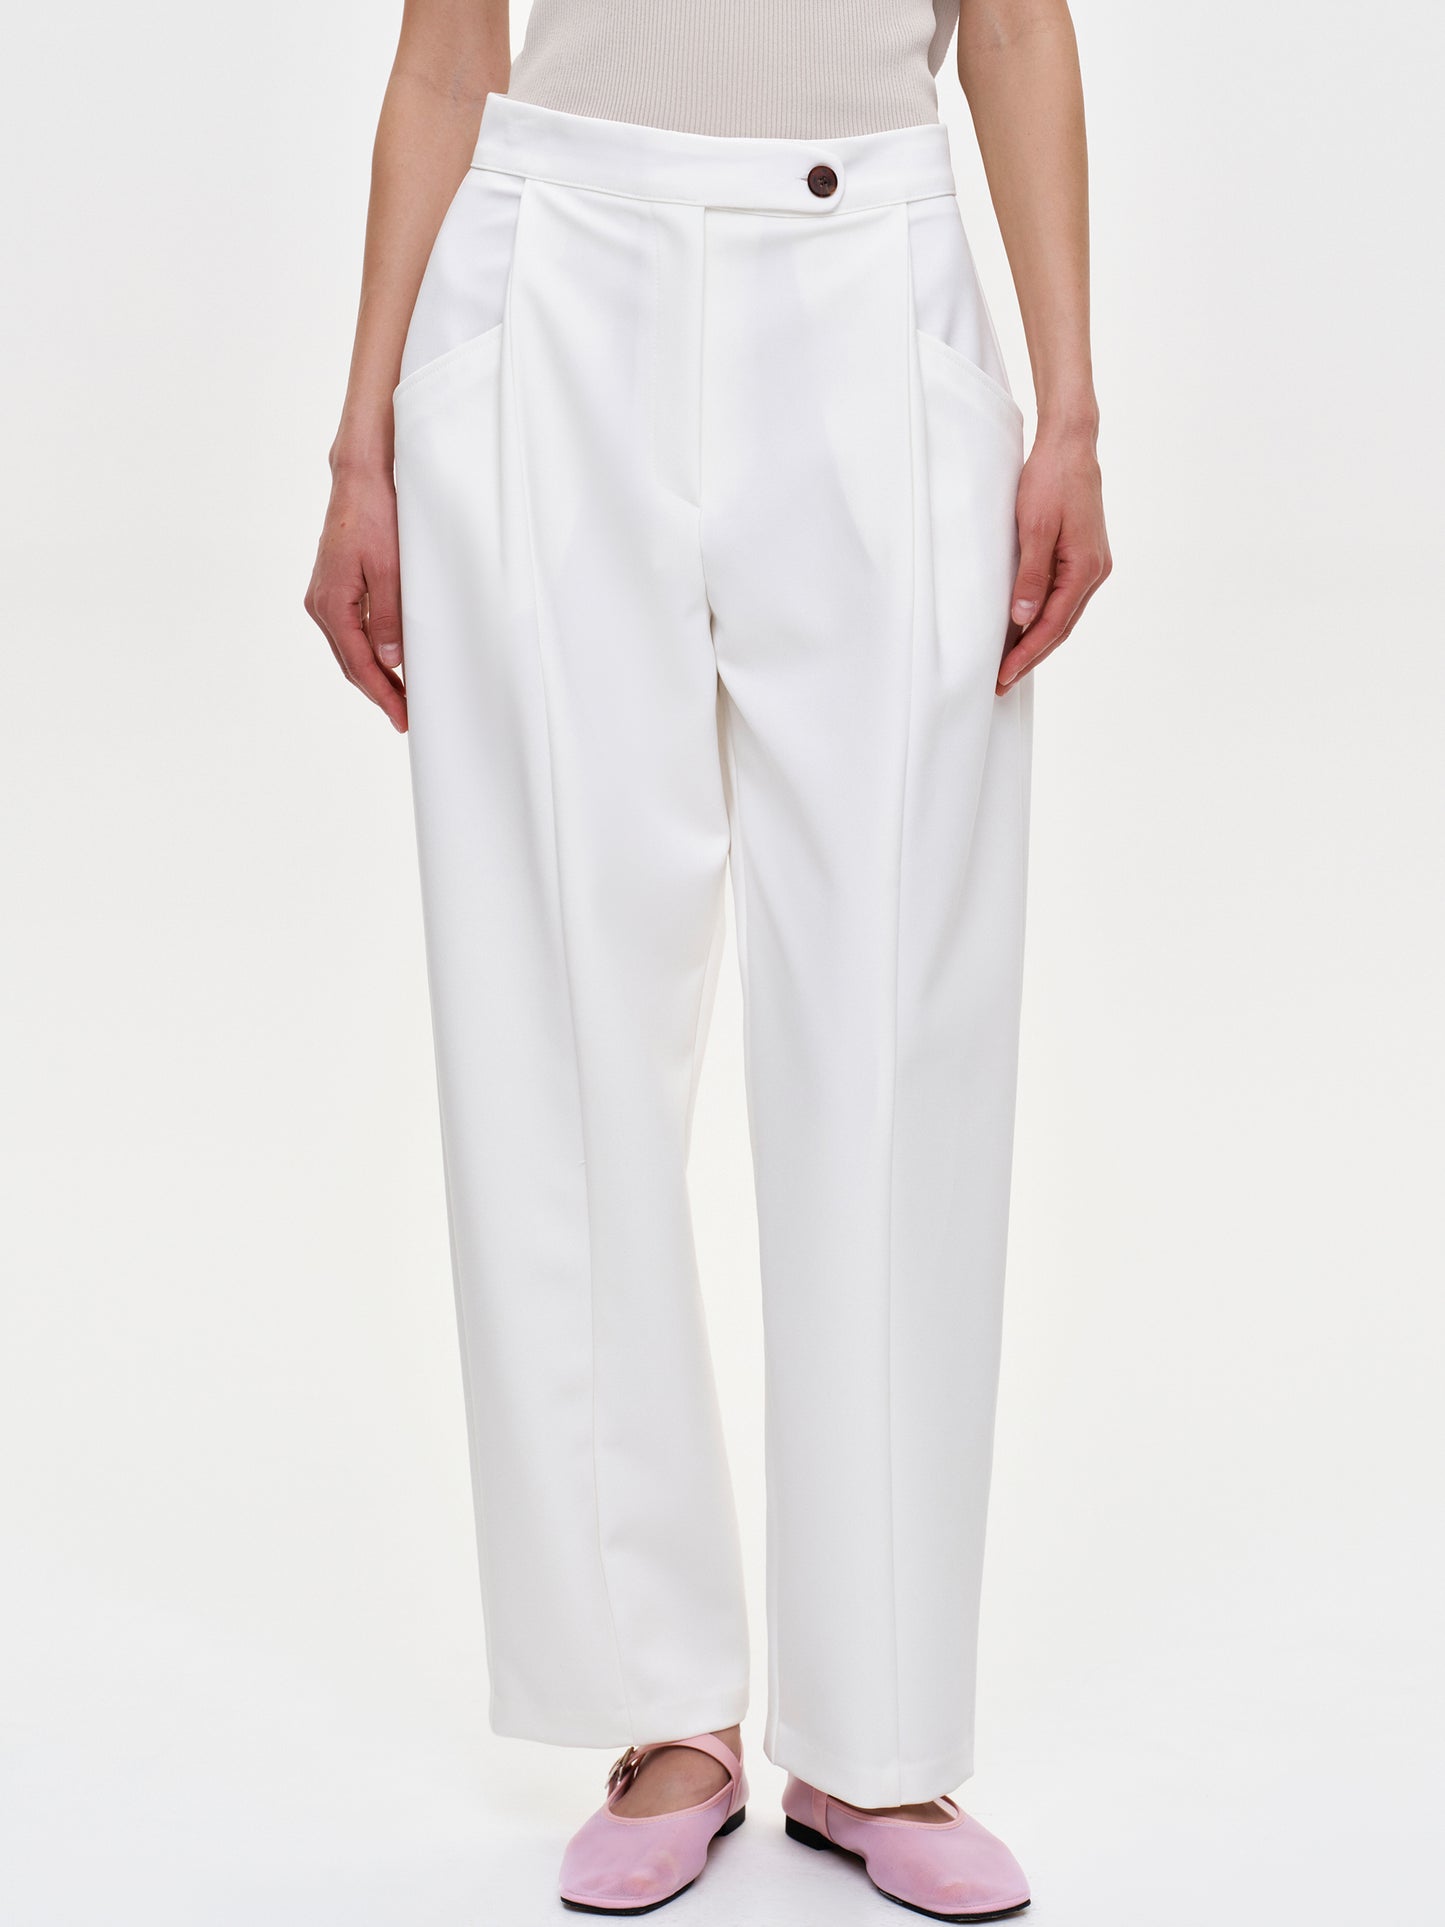 Solid Pocket Trousers, White